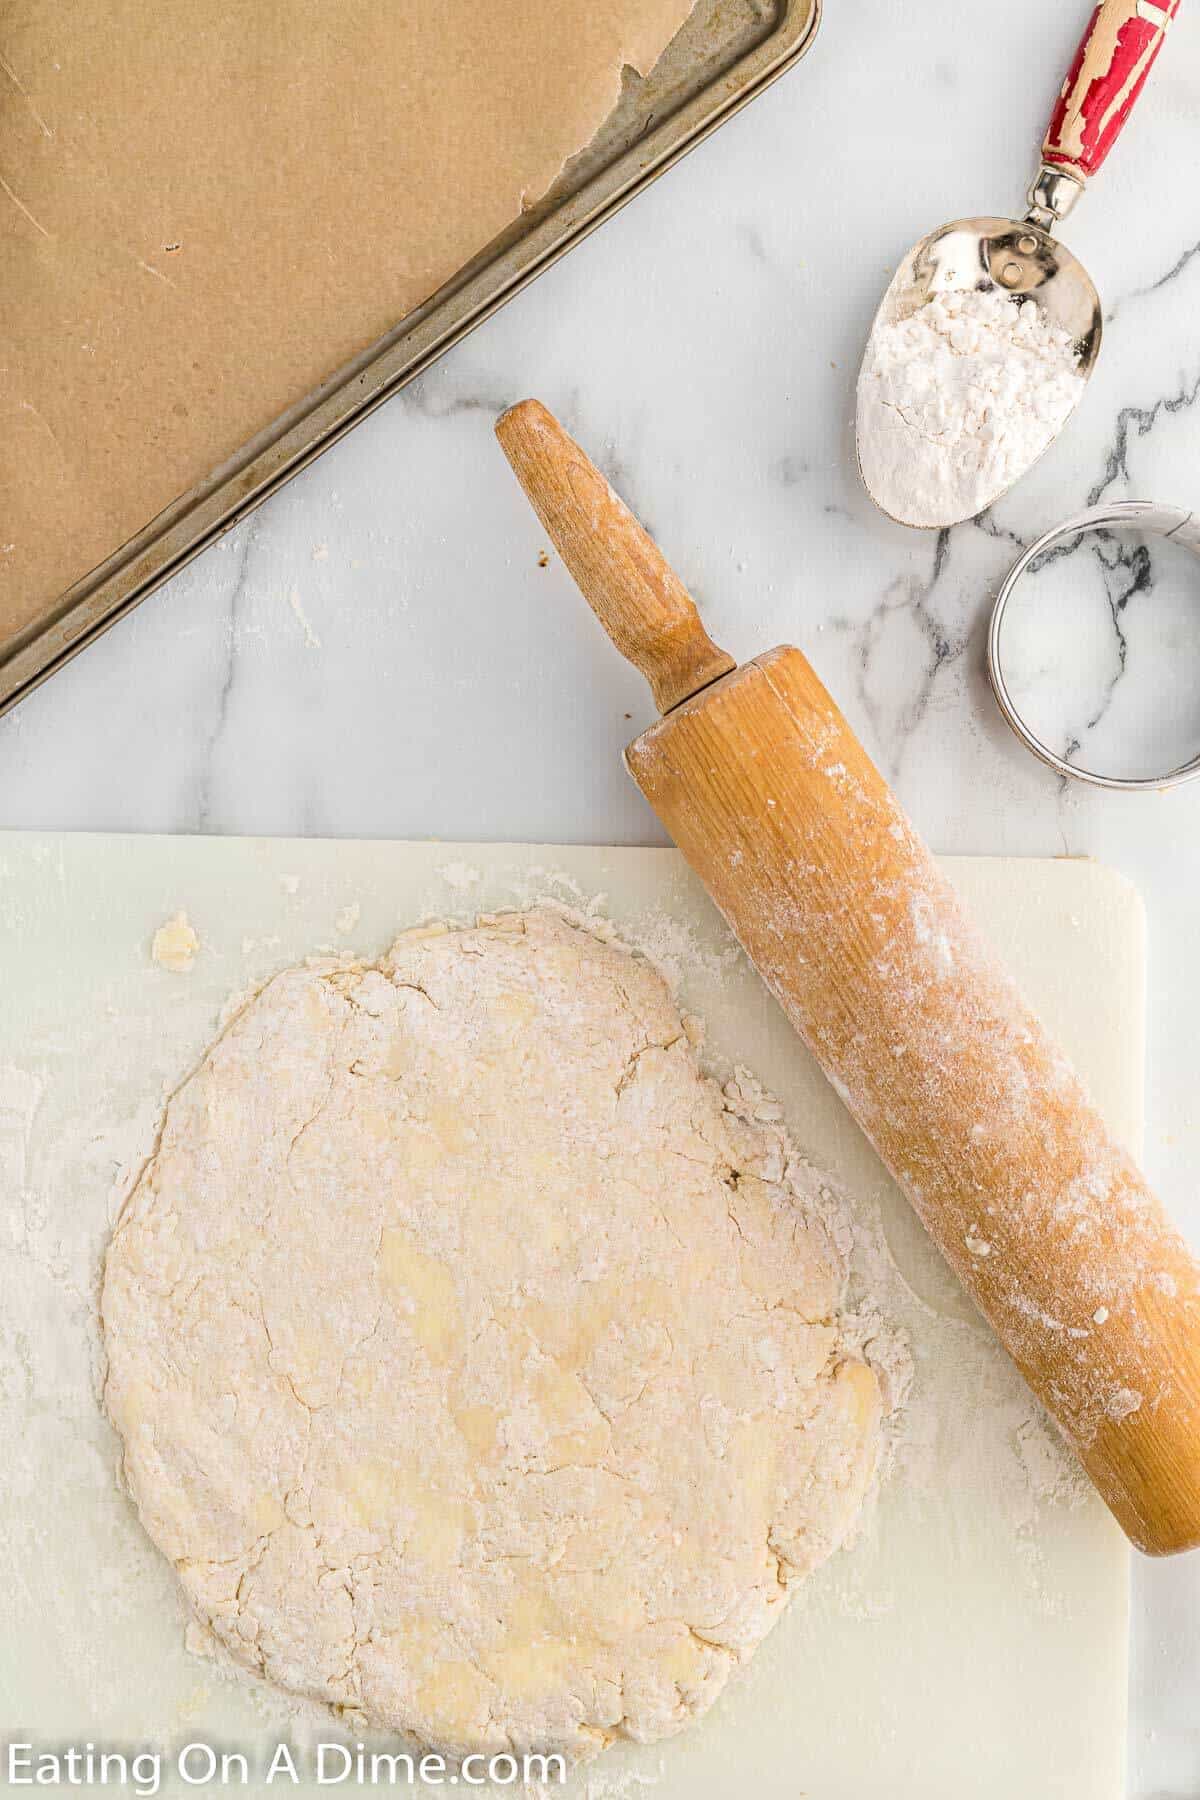 Rolling the dough on a floured surface with a rolling pin